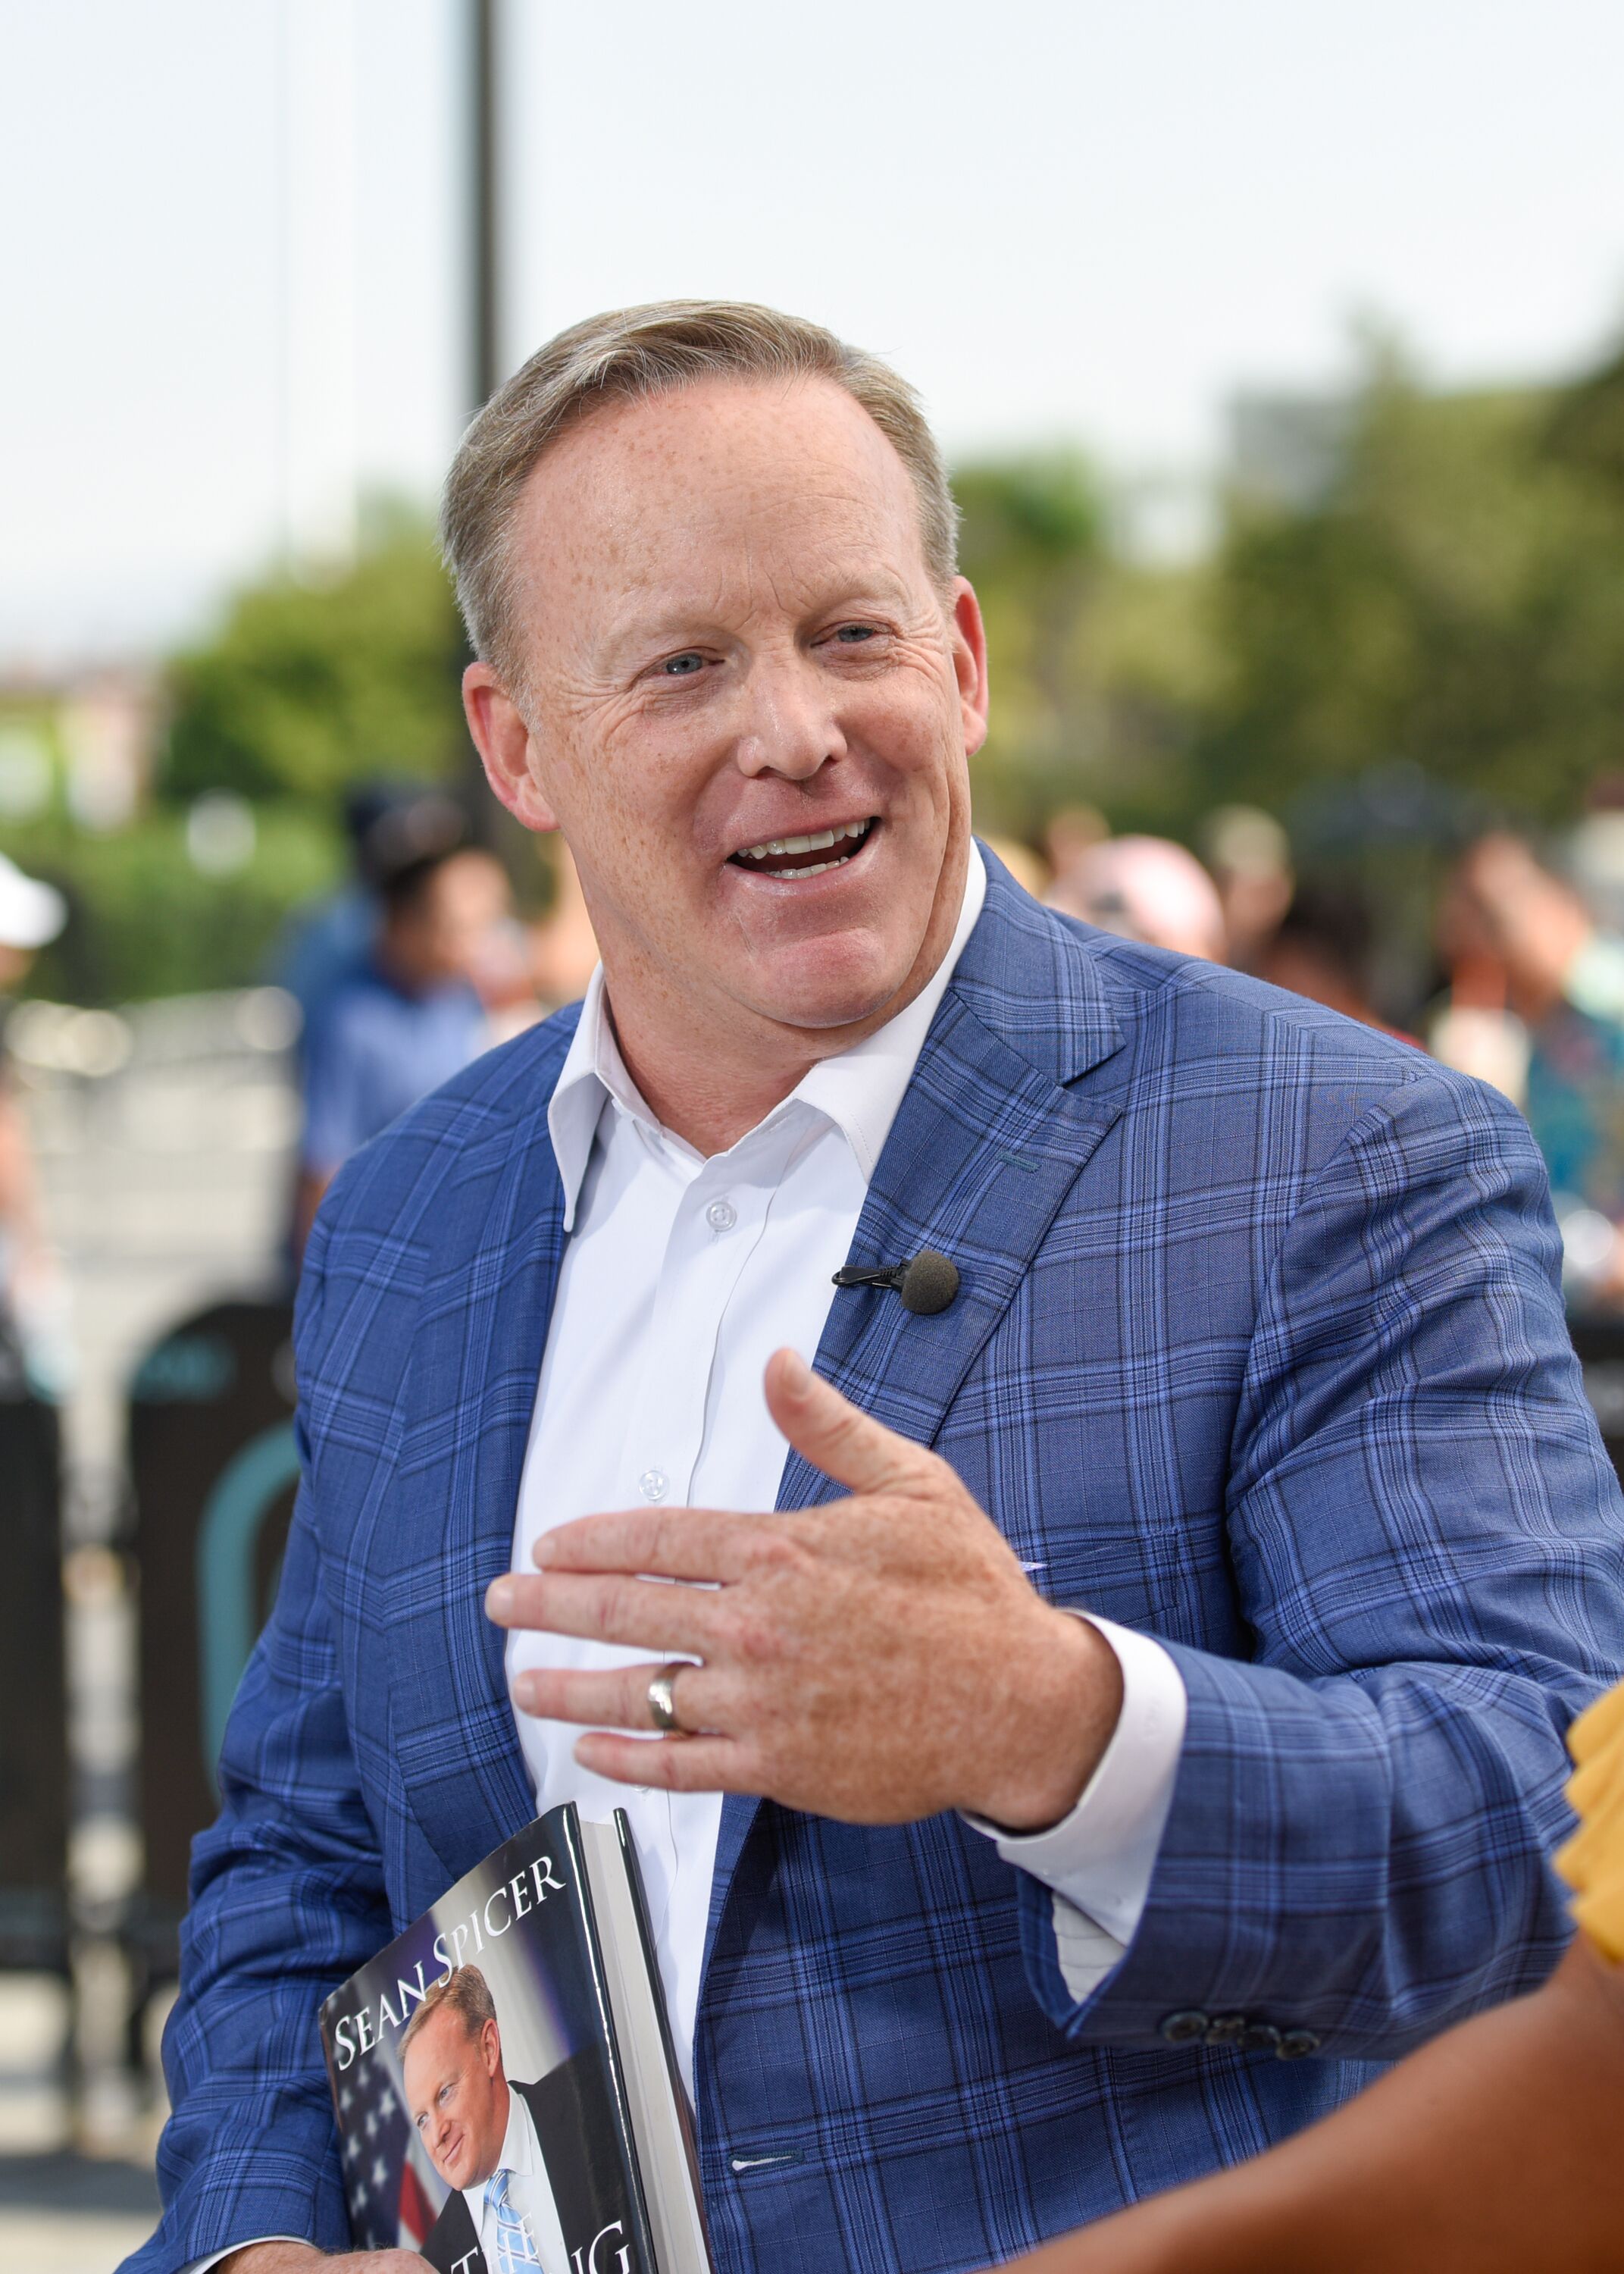 Sean Spicer visits 'Extra' at Universal Studios Hollywood on August 1, 2018 in Universal City, California | Photo: Getty Images